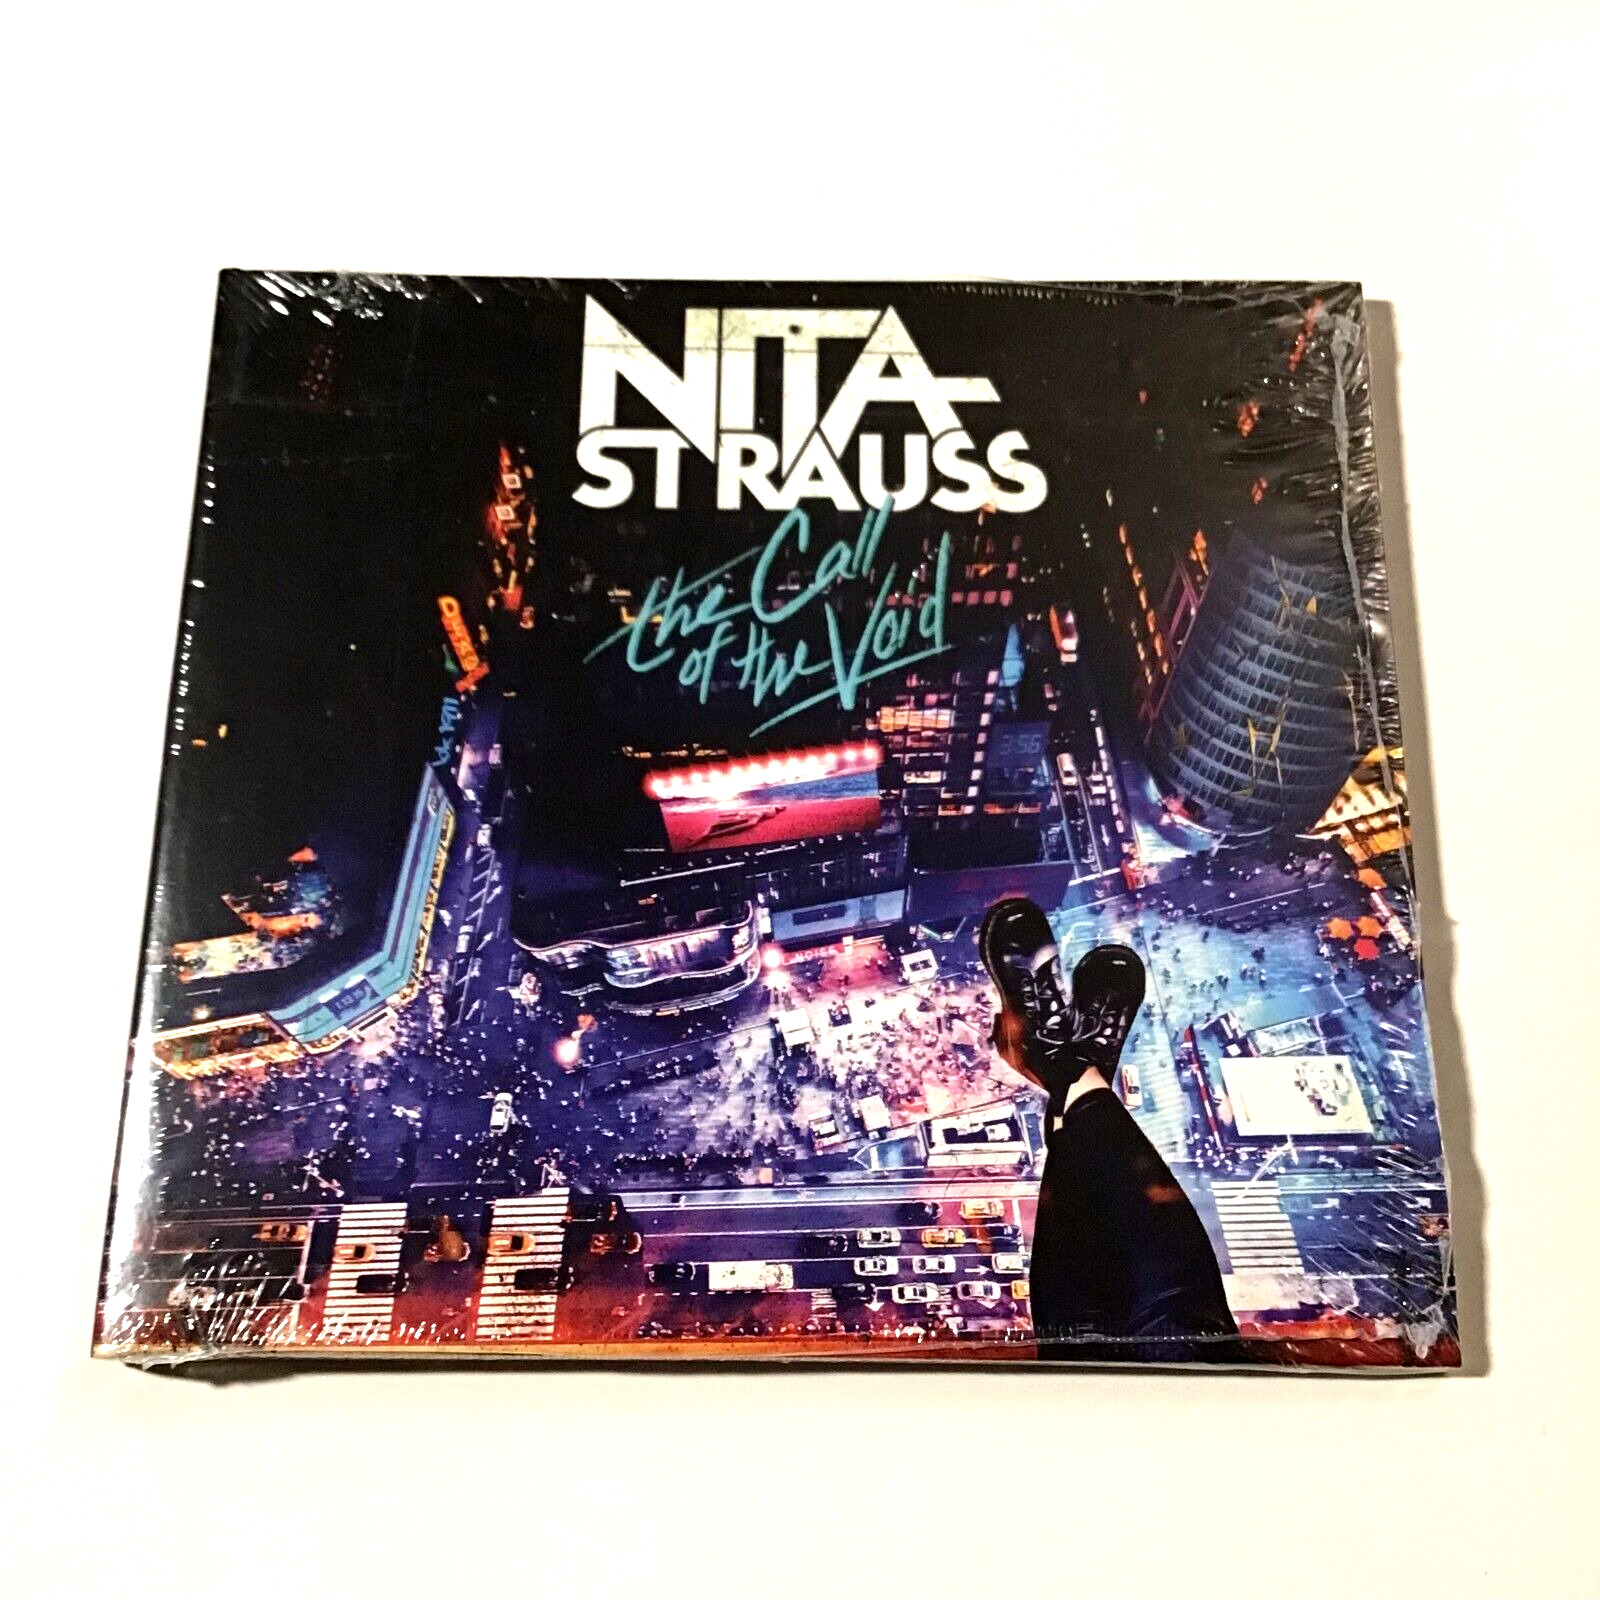 Nita Strauss - The Call of The Void (CD 2023) Hard Rock, New Sealed Alice Cooper